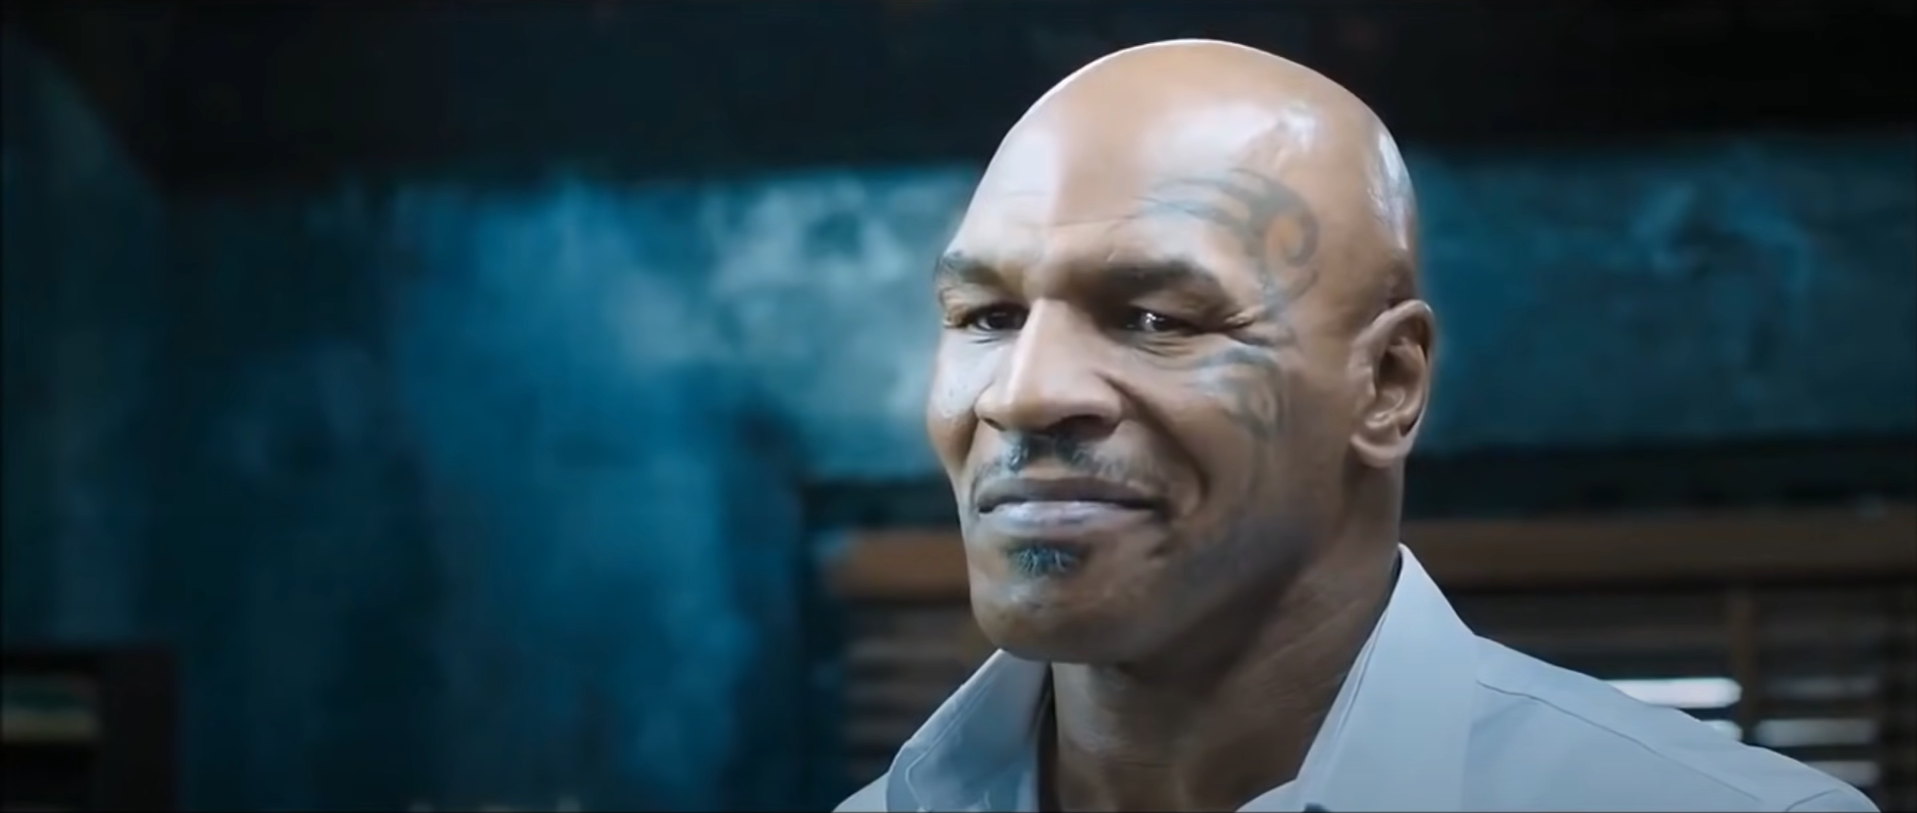 Mike Tyson to star with Sean Penn in medical drama